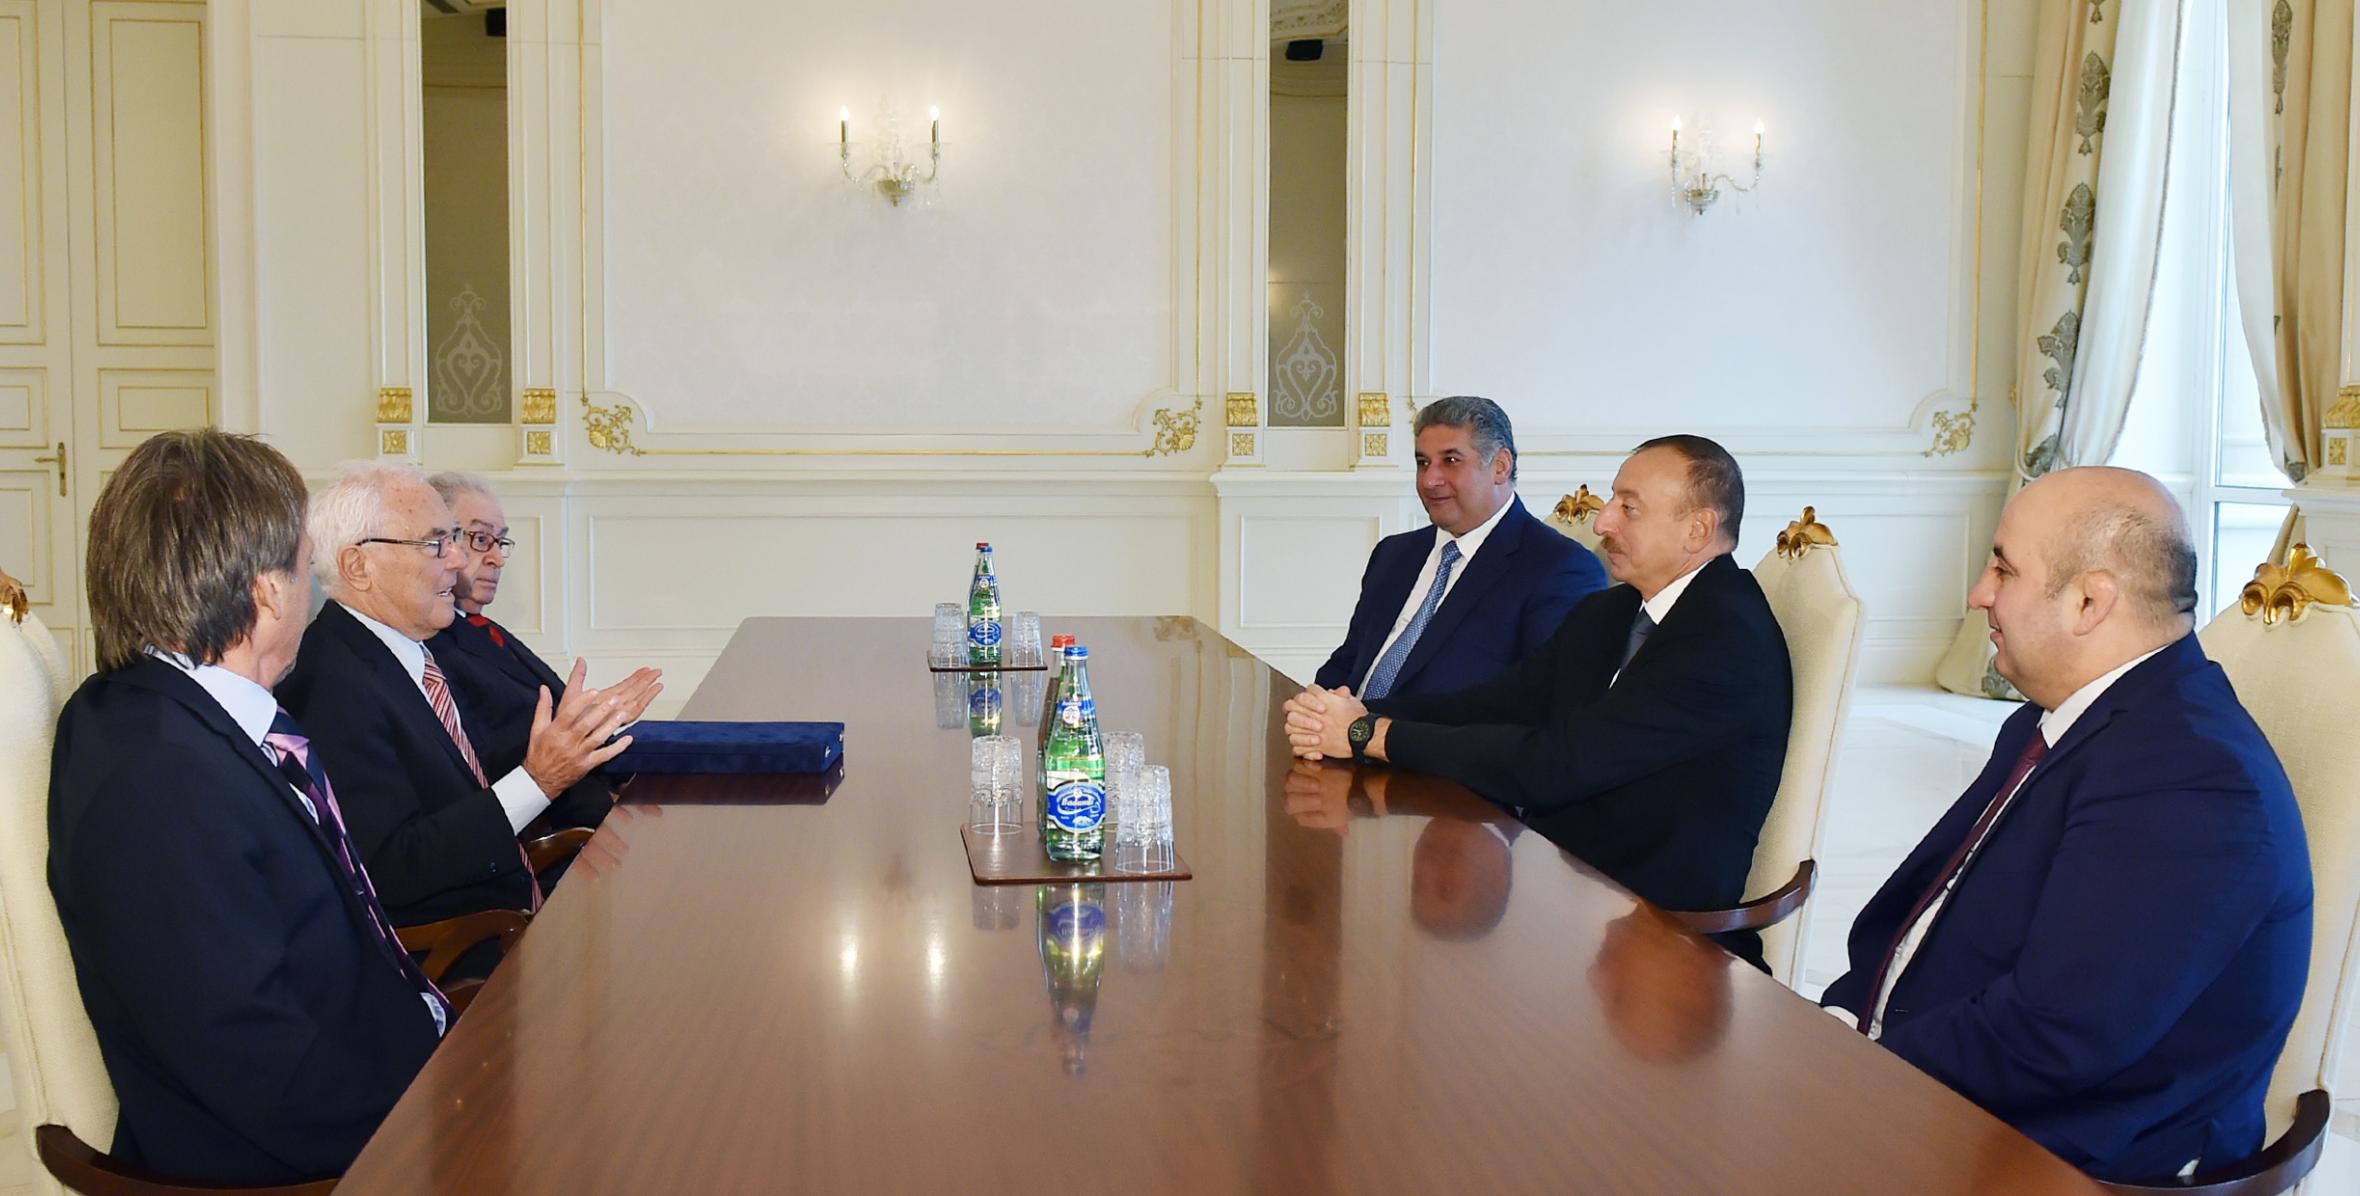 Ilham Aliyev received the President of the International Fair Play Committee, and the President and Vice-President of the European Fair Play Movement